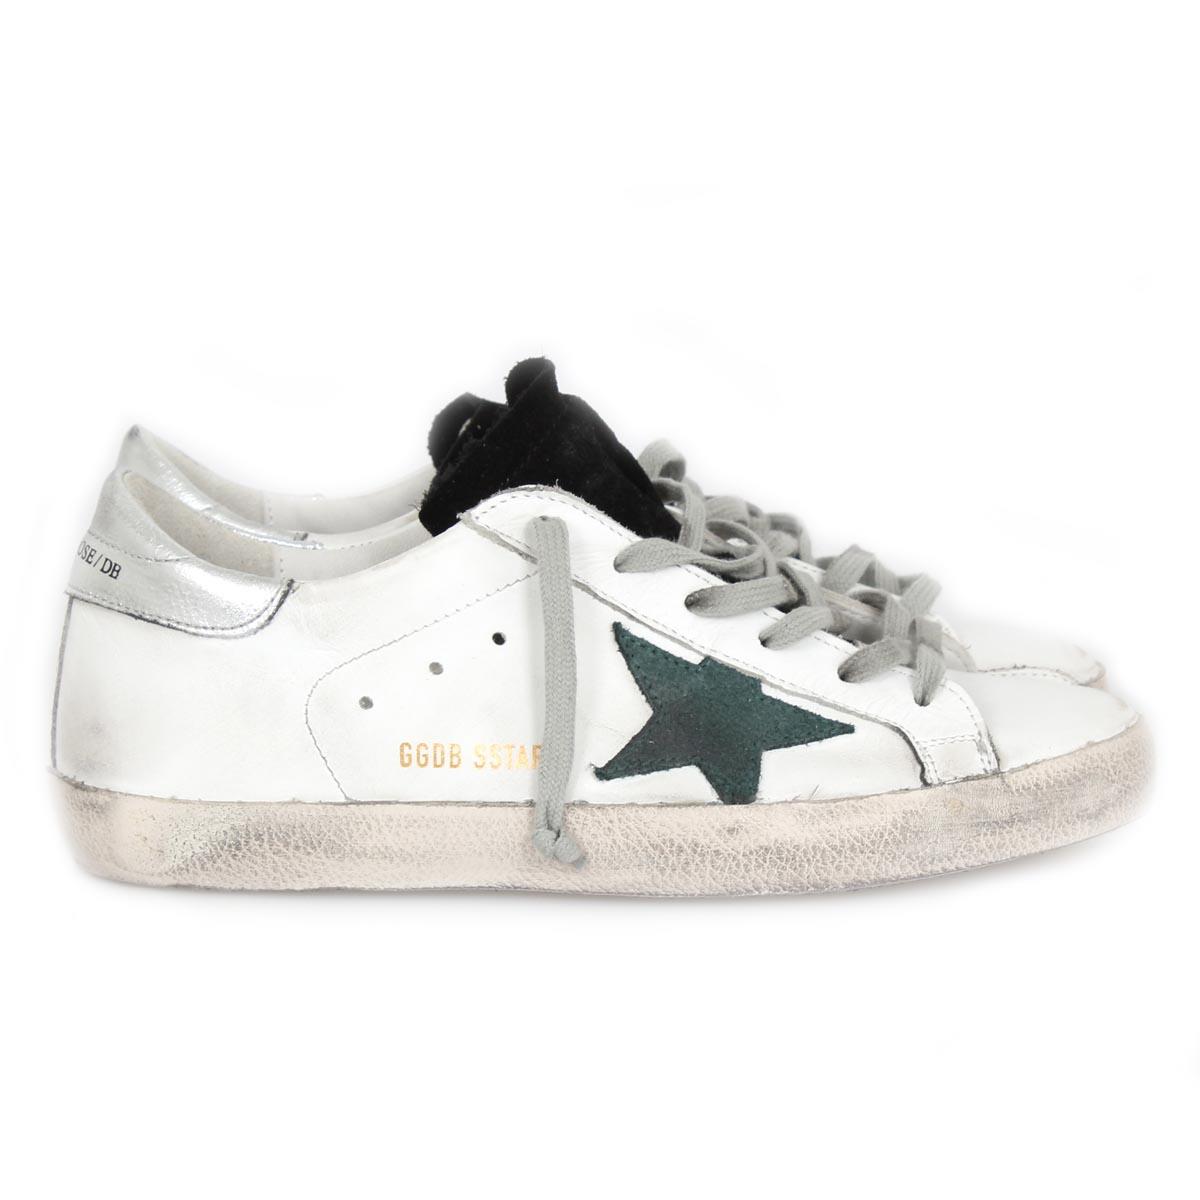 Care and maintenance of the golden goose sneakers – StyleSkier.com